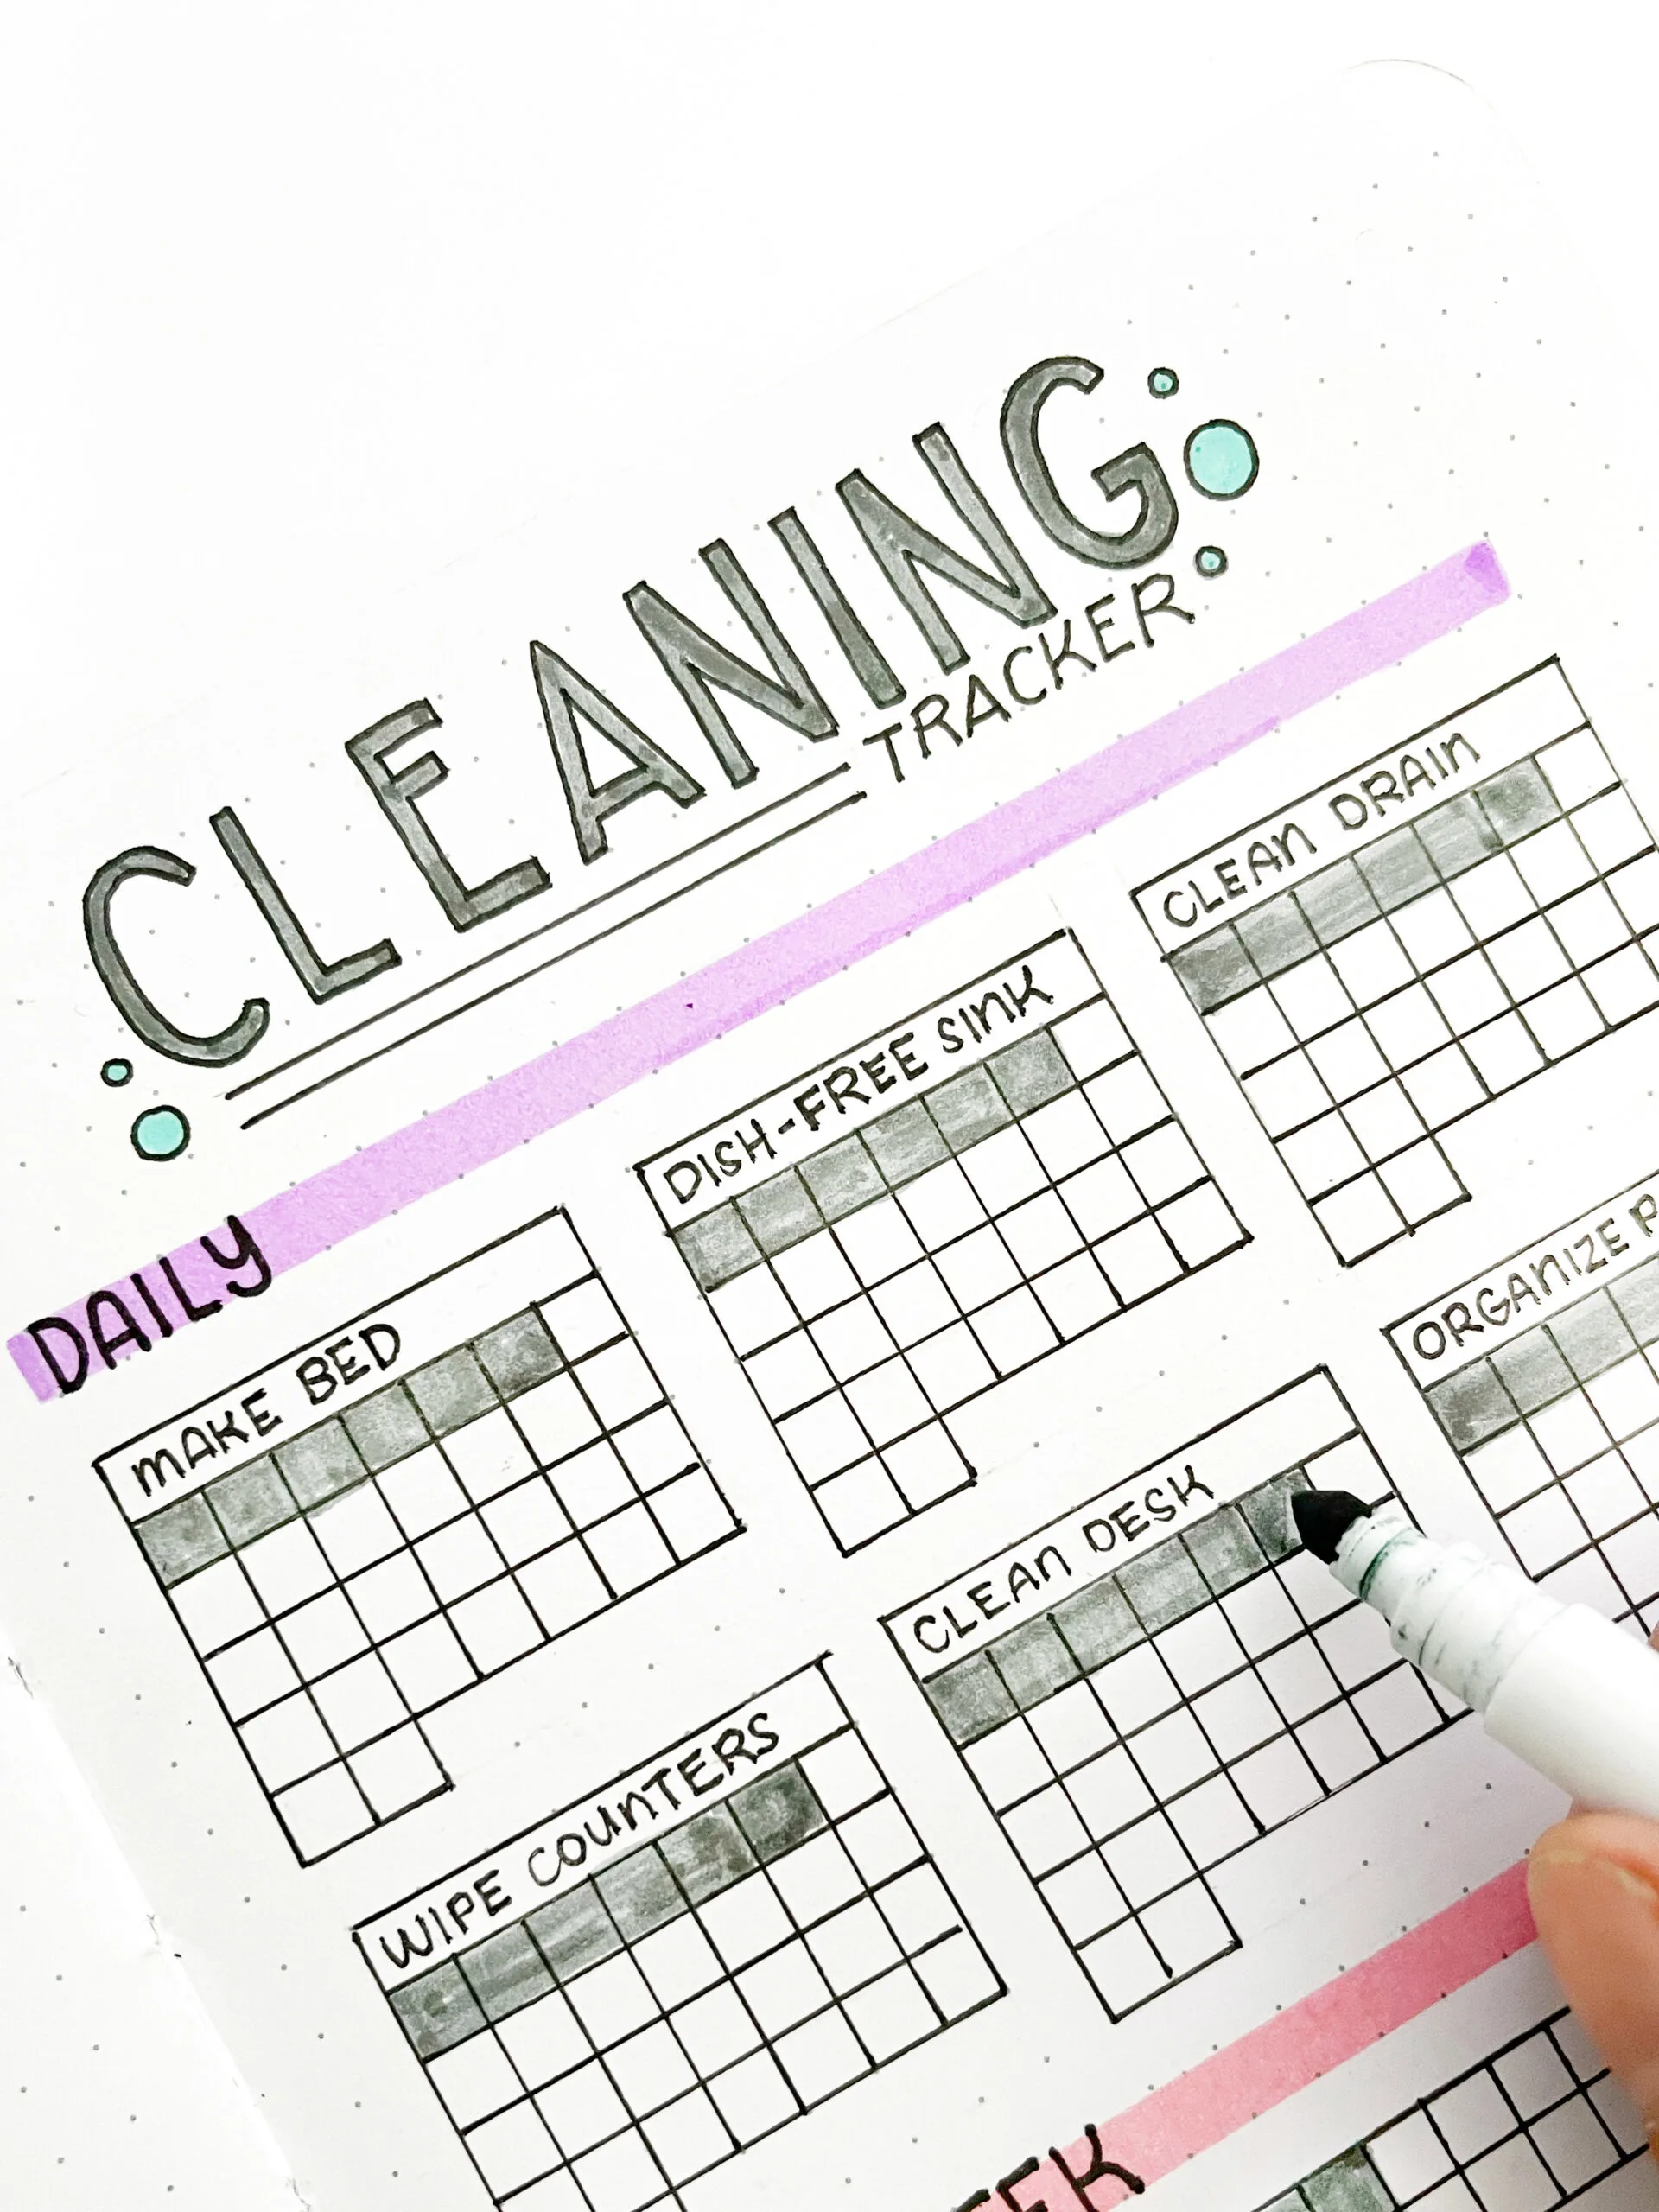 Logging a cleaning chore in the cleaning tracker using a pencil in a bullet journal.